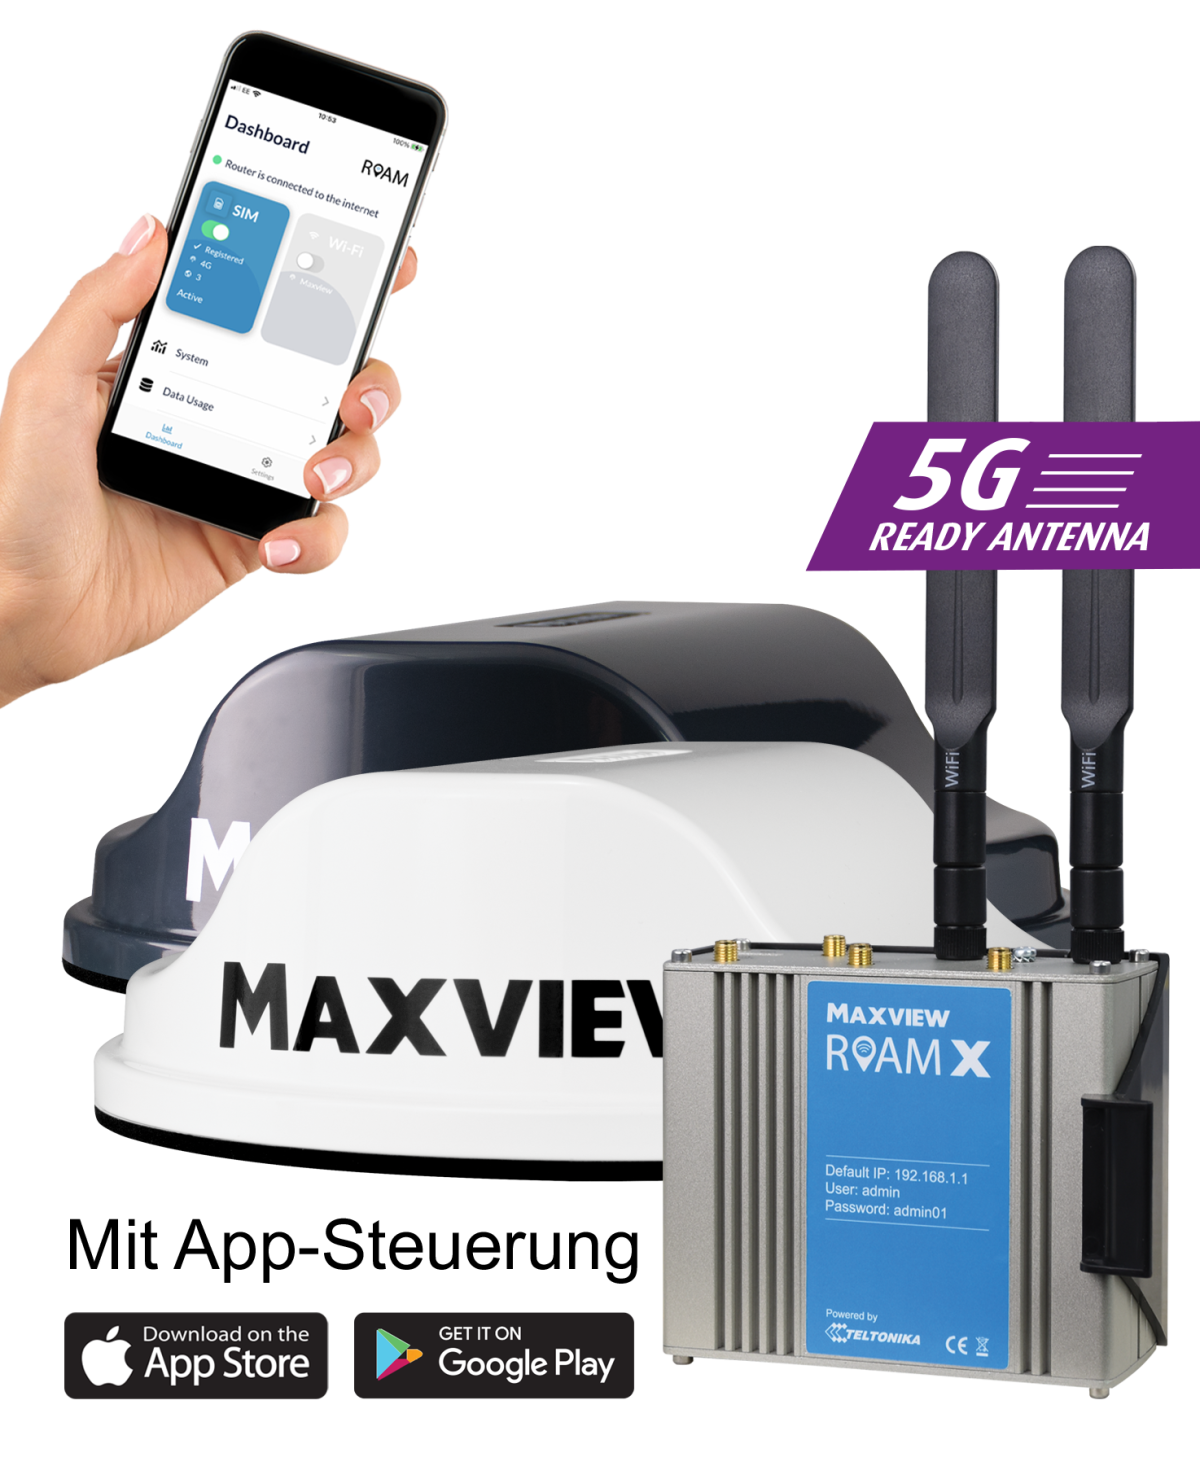 Maxview Roam X mobile 5G ready / WiFi-Antenne white inkl. Router von Maxview